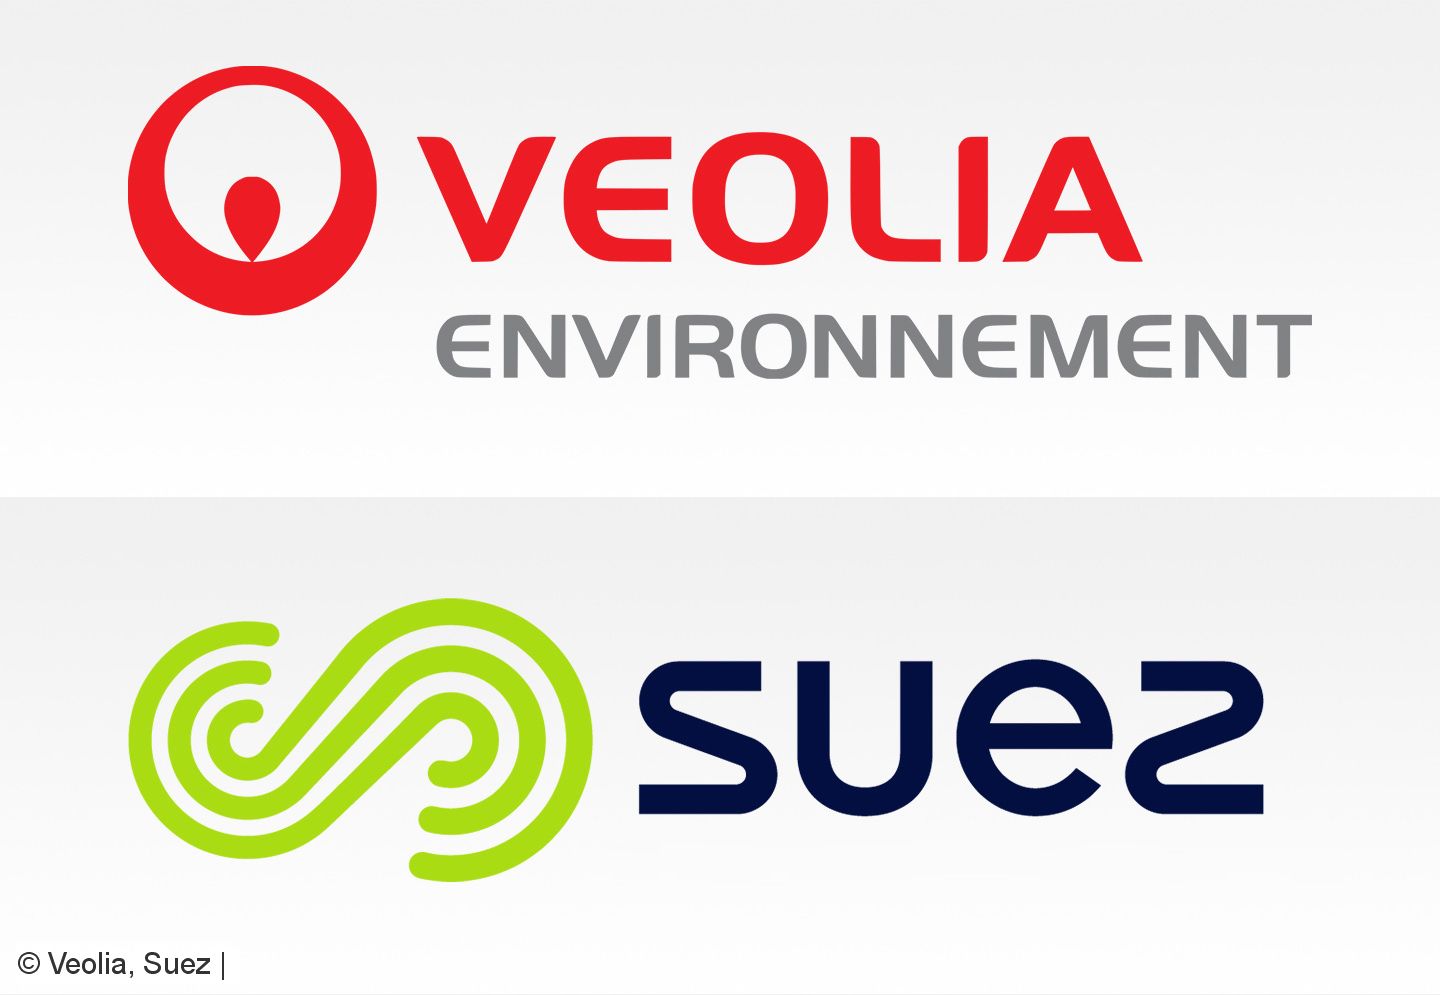 The British Competition Authority has again postponed its decision on the merger of Veolia and Suez